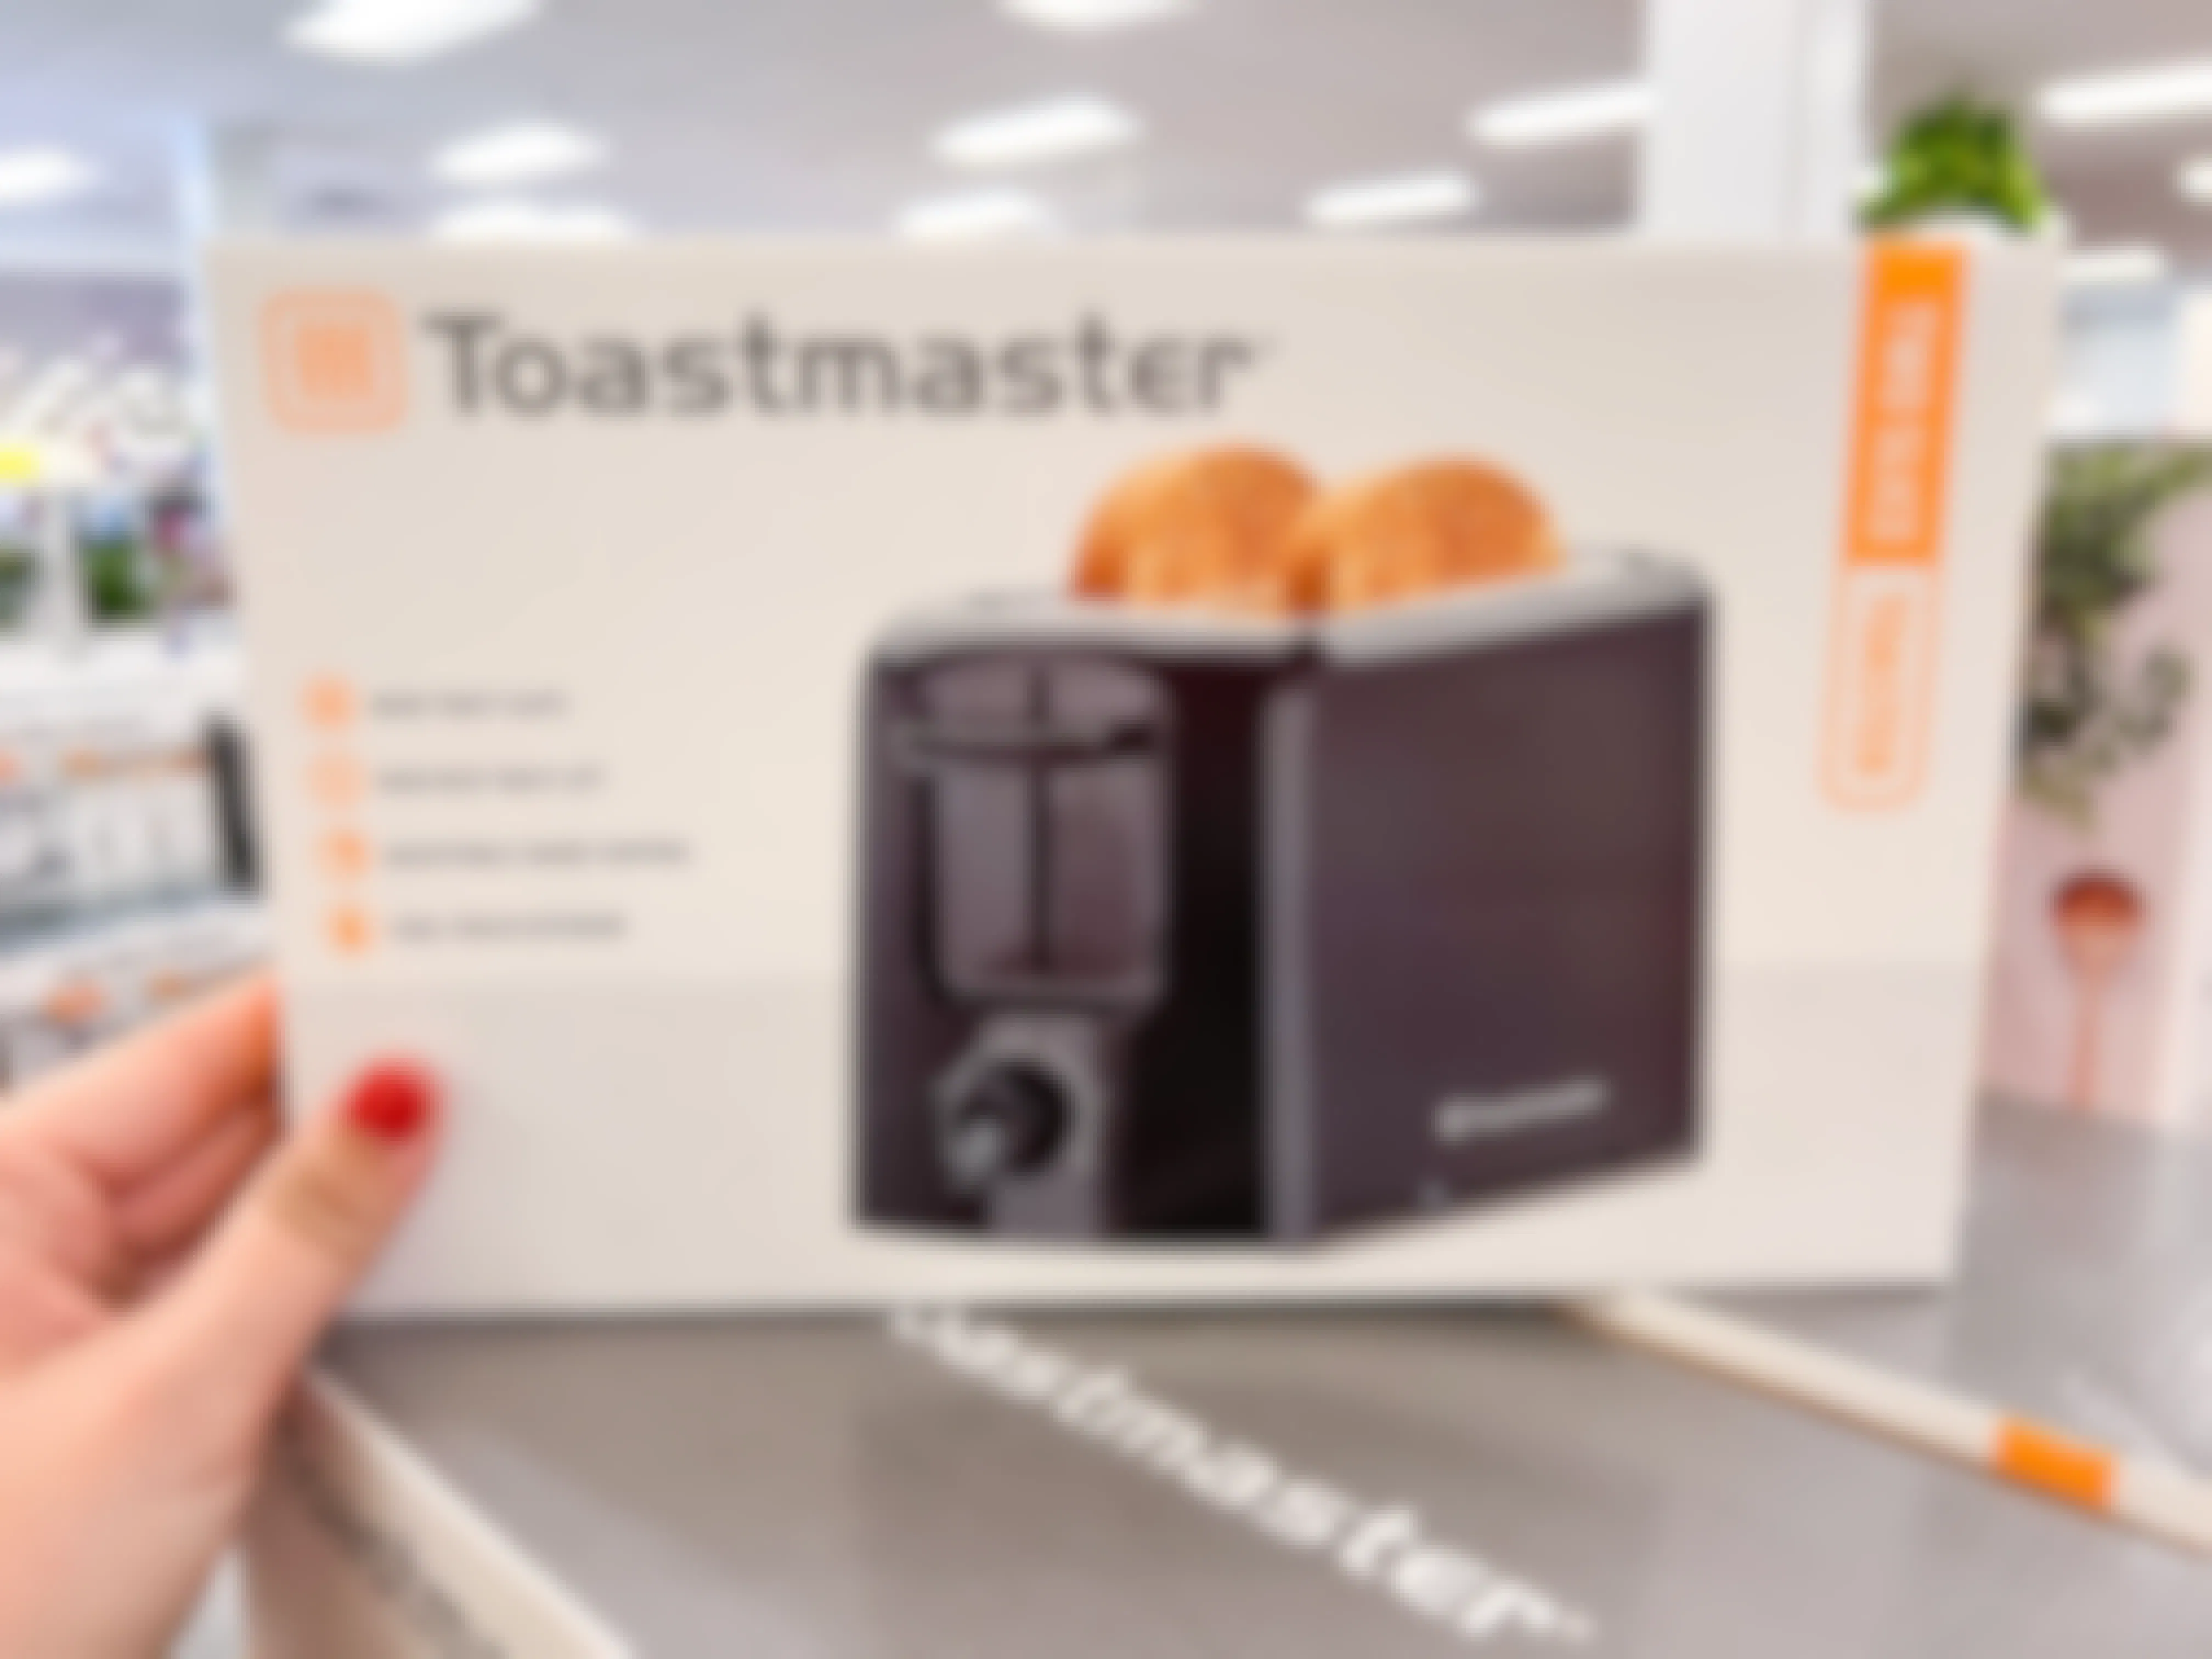 a person holding up a toastmaster toaster at kohls